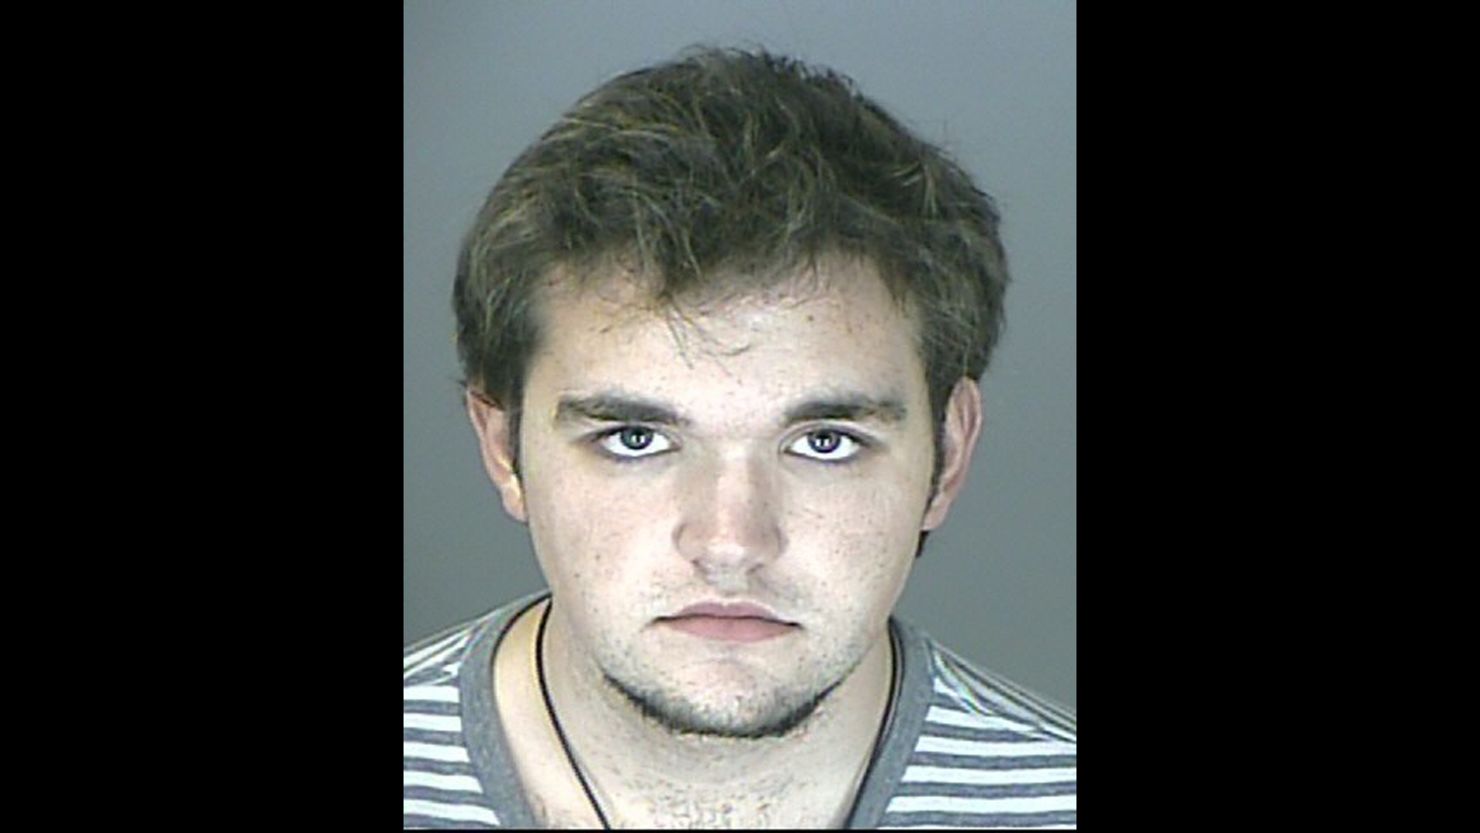 Austin Reed Sigg was 17 at the time of the killing and was charged as an adult.